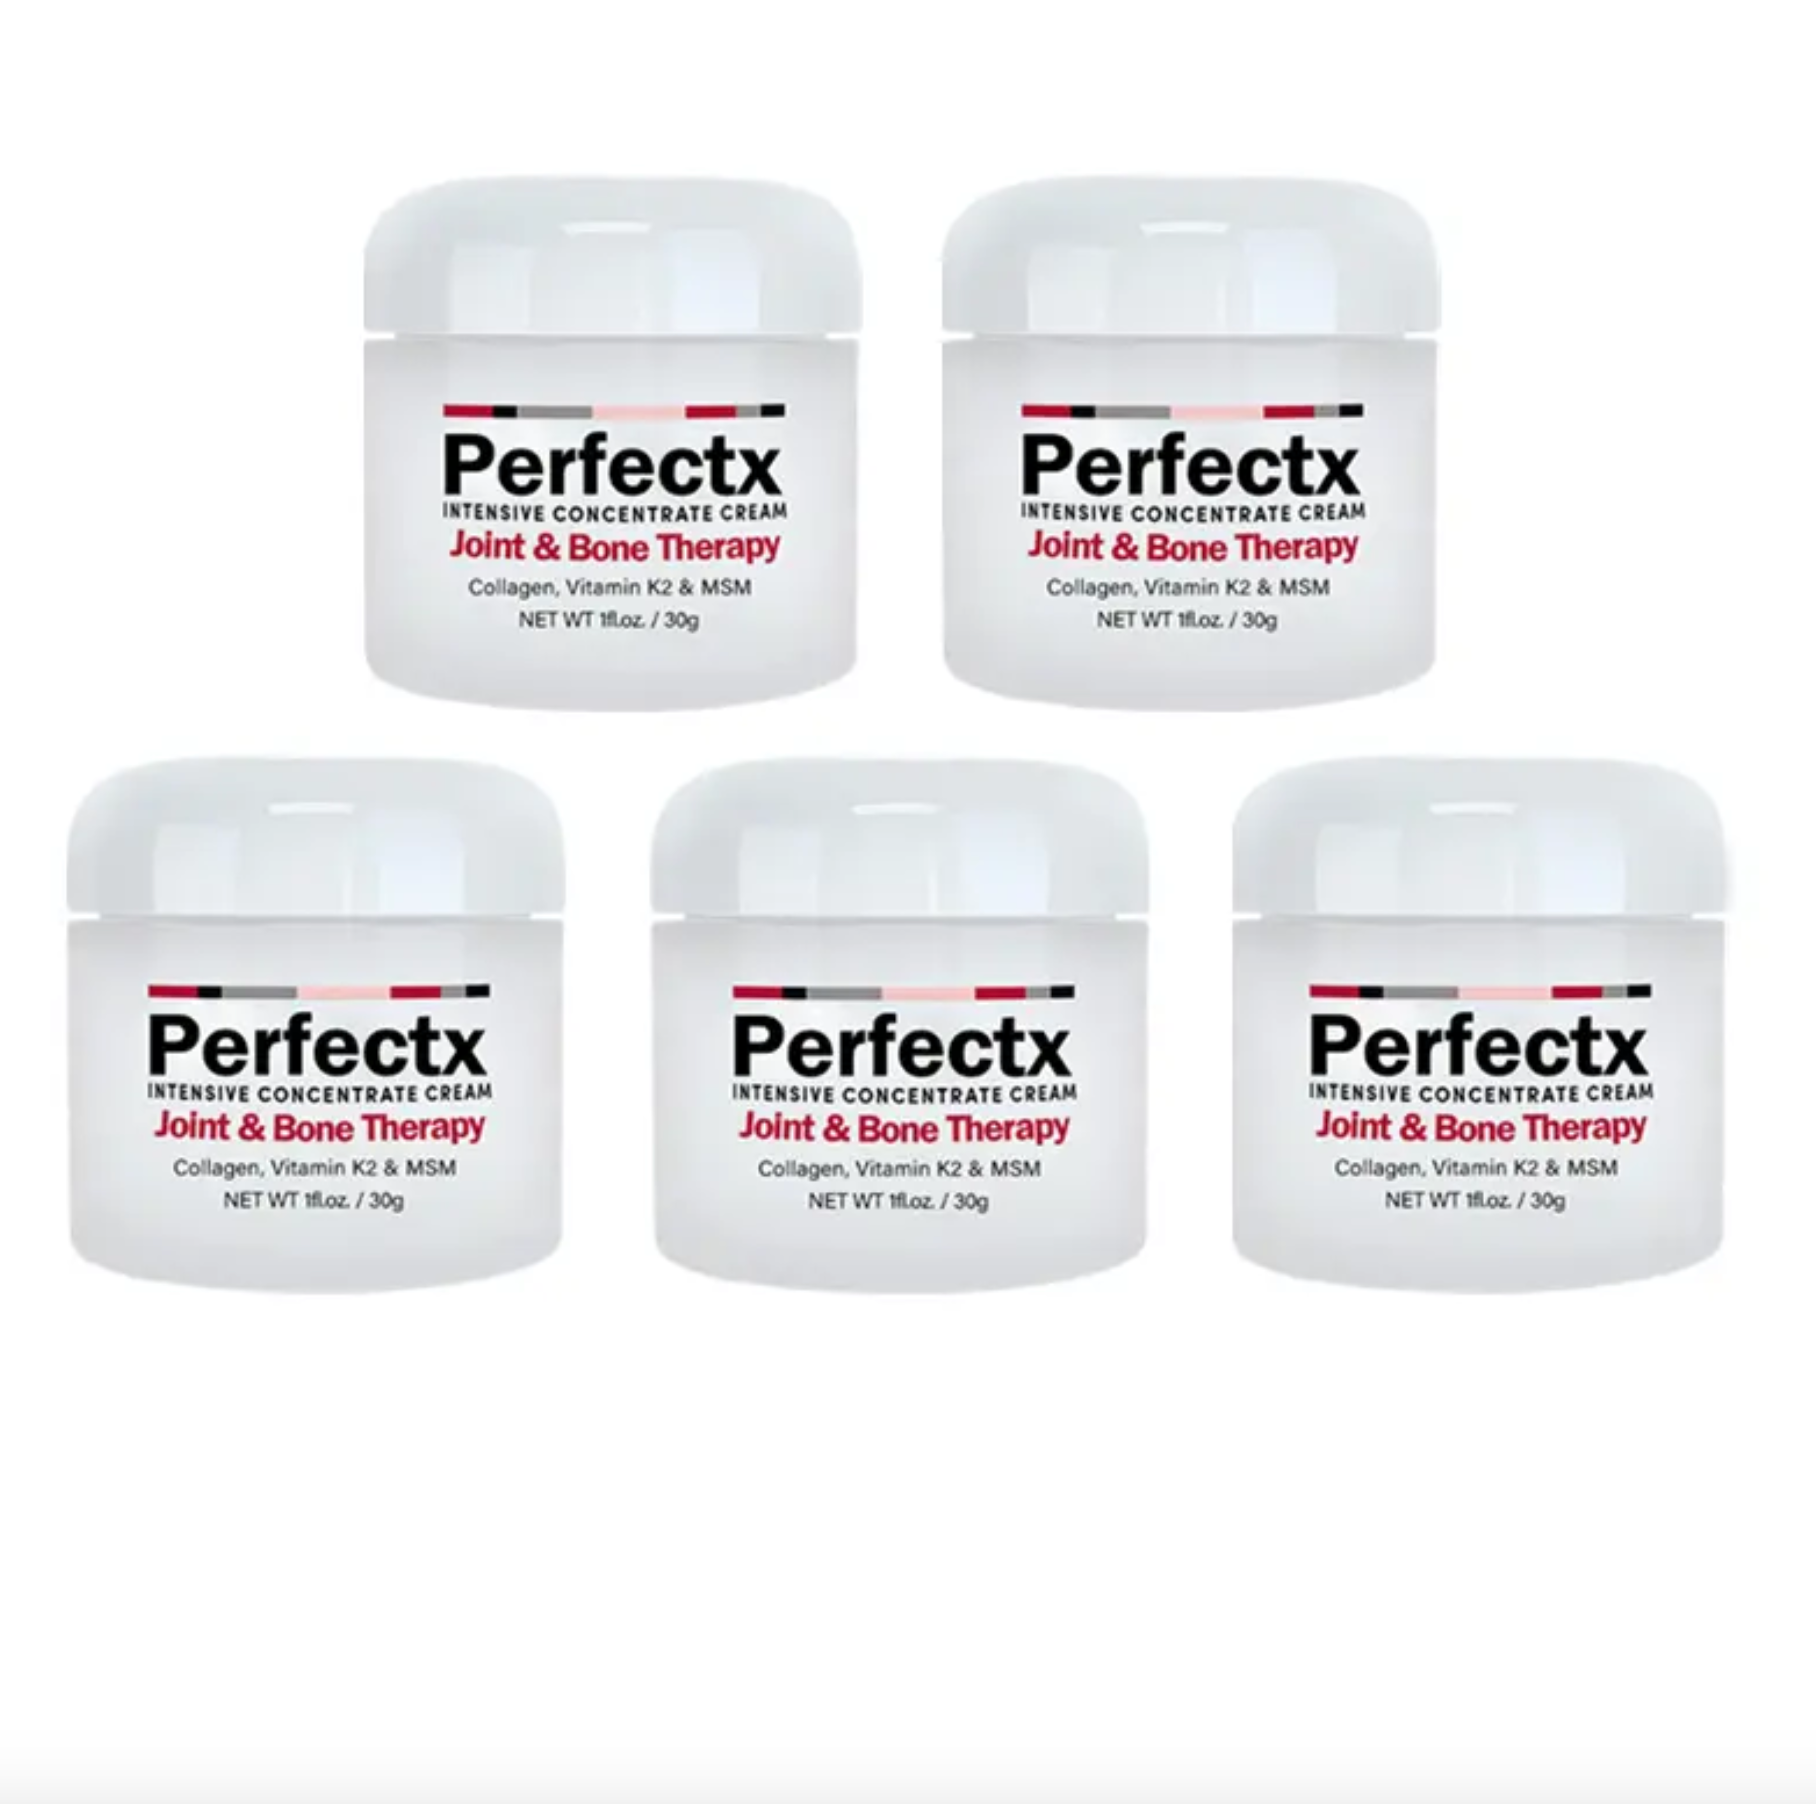 CC Perfectx Joint And Bone Therapy Cream(Limited Time Discount - Last Day)